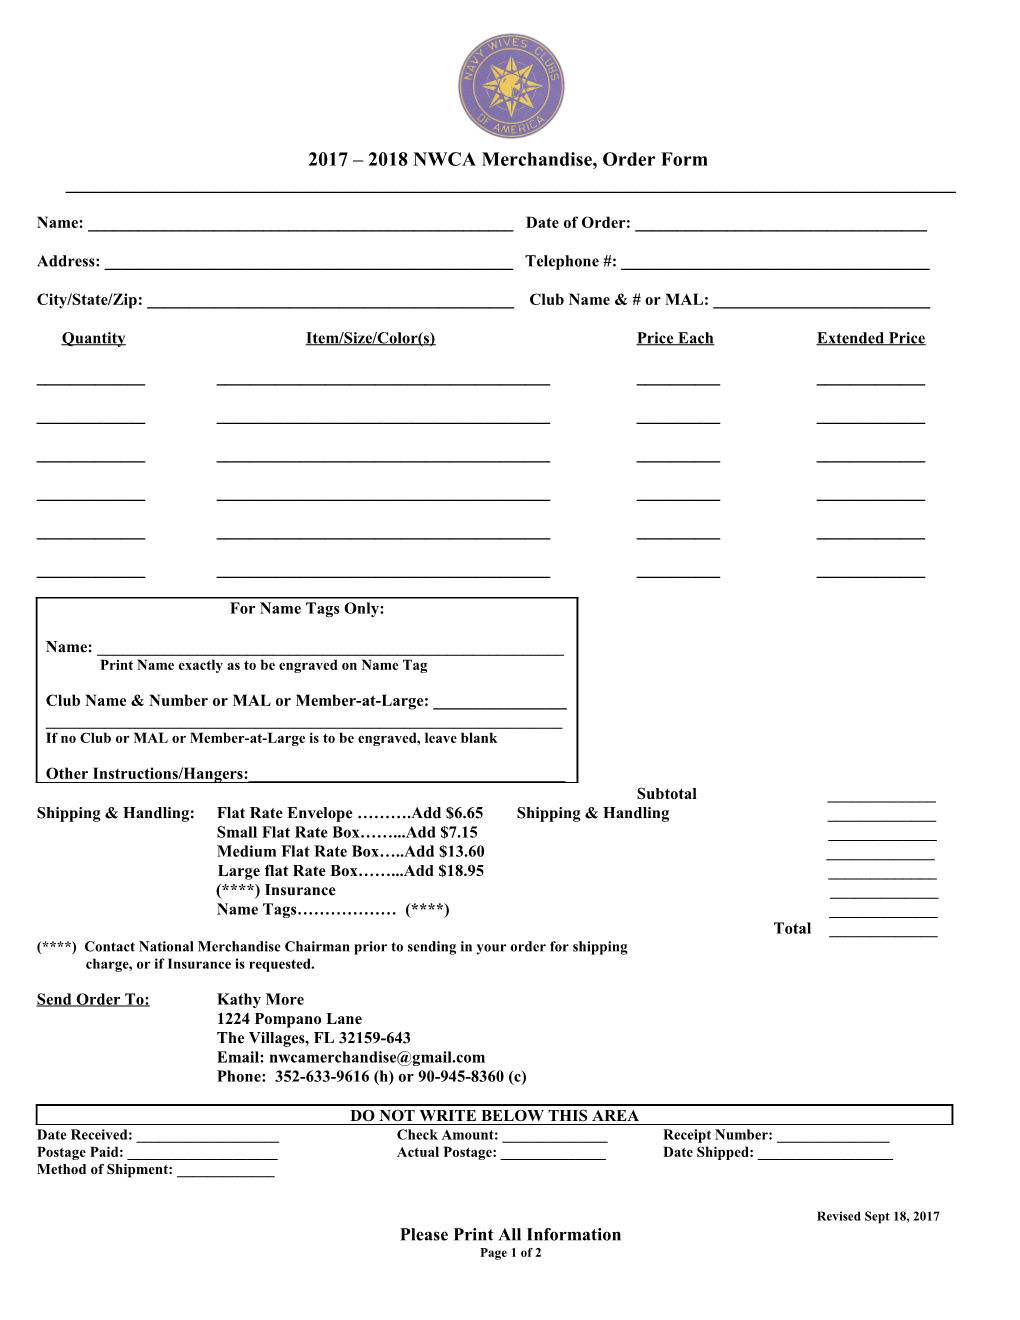 2008 NWCA Merchandise & Stationary Order Form